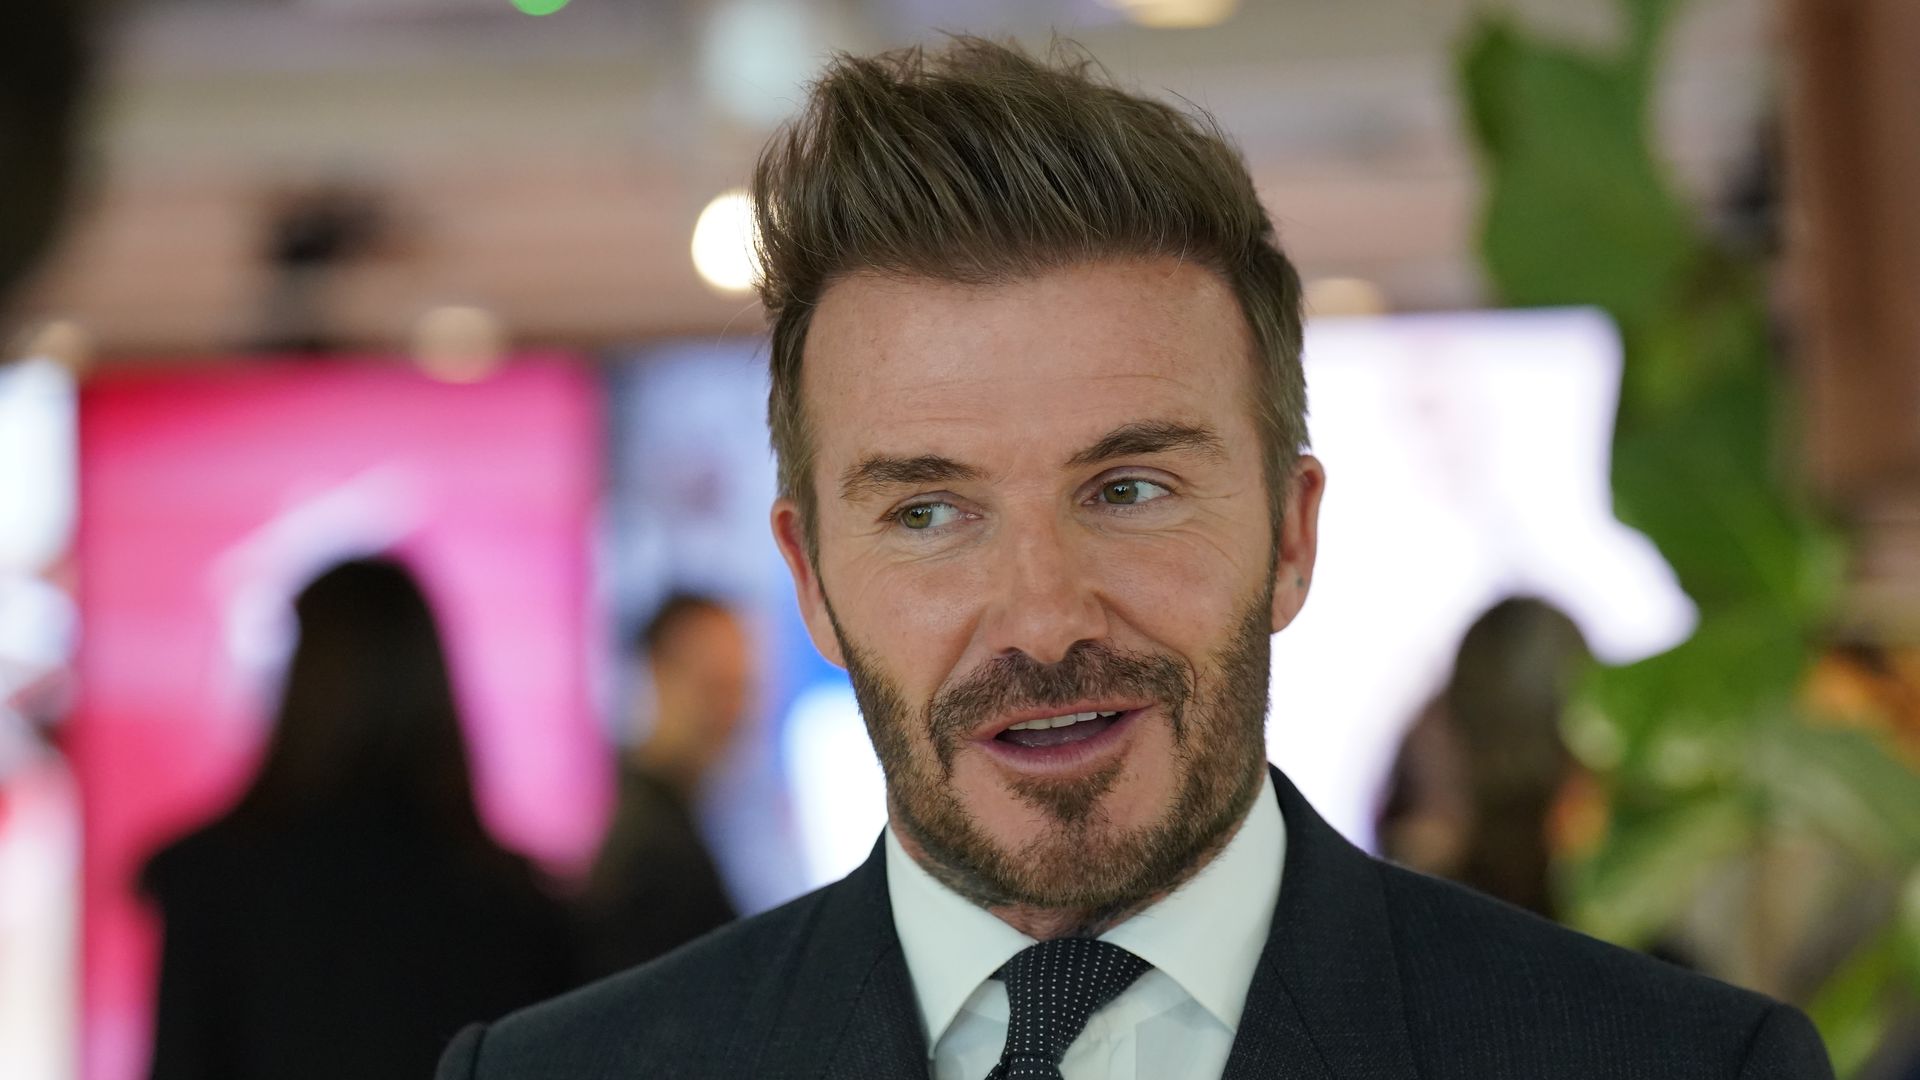 David Beckham looking cheeky in a black suit